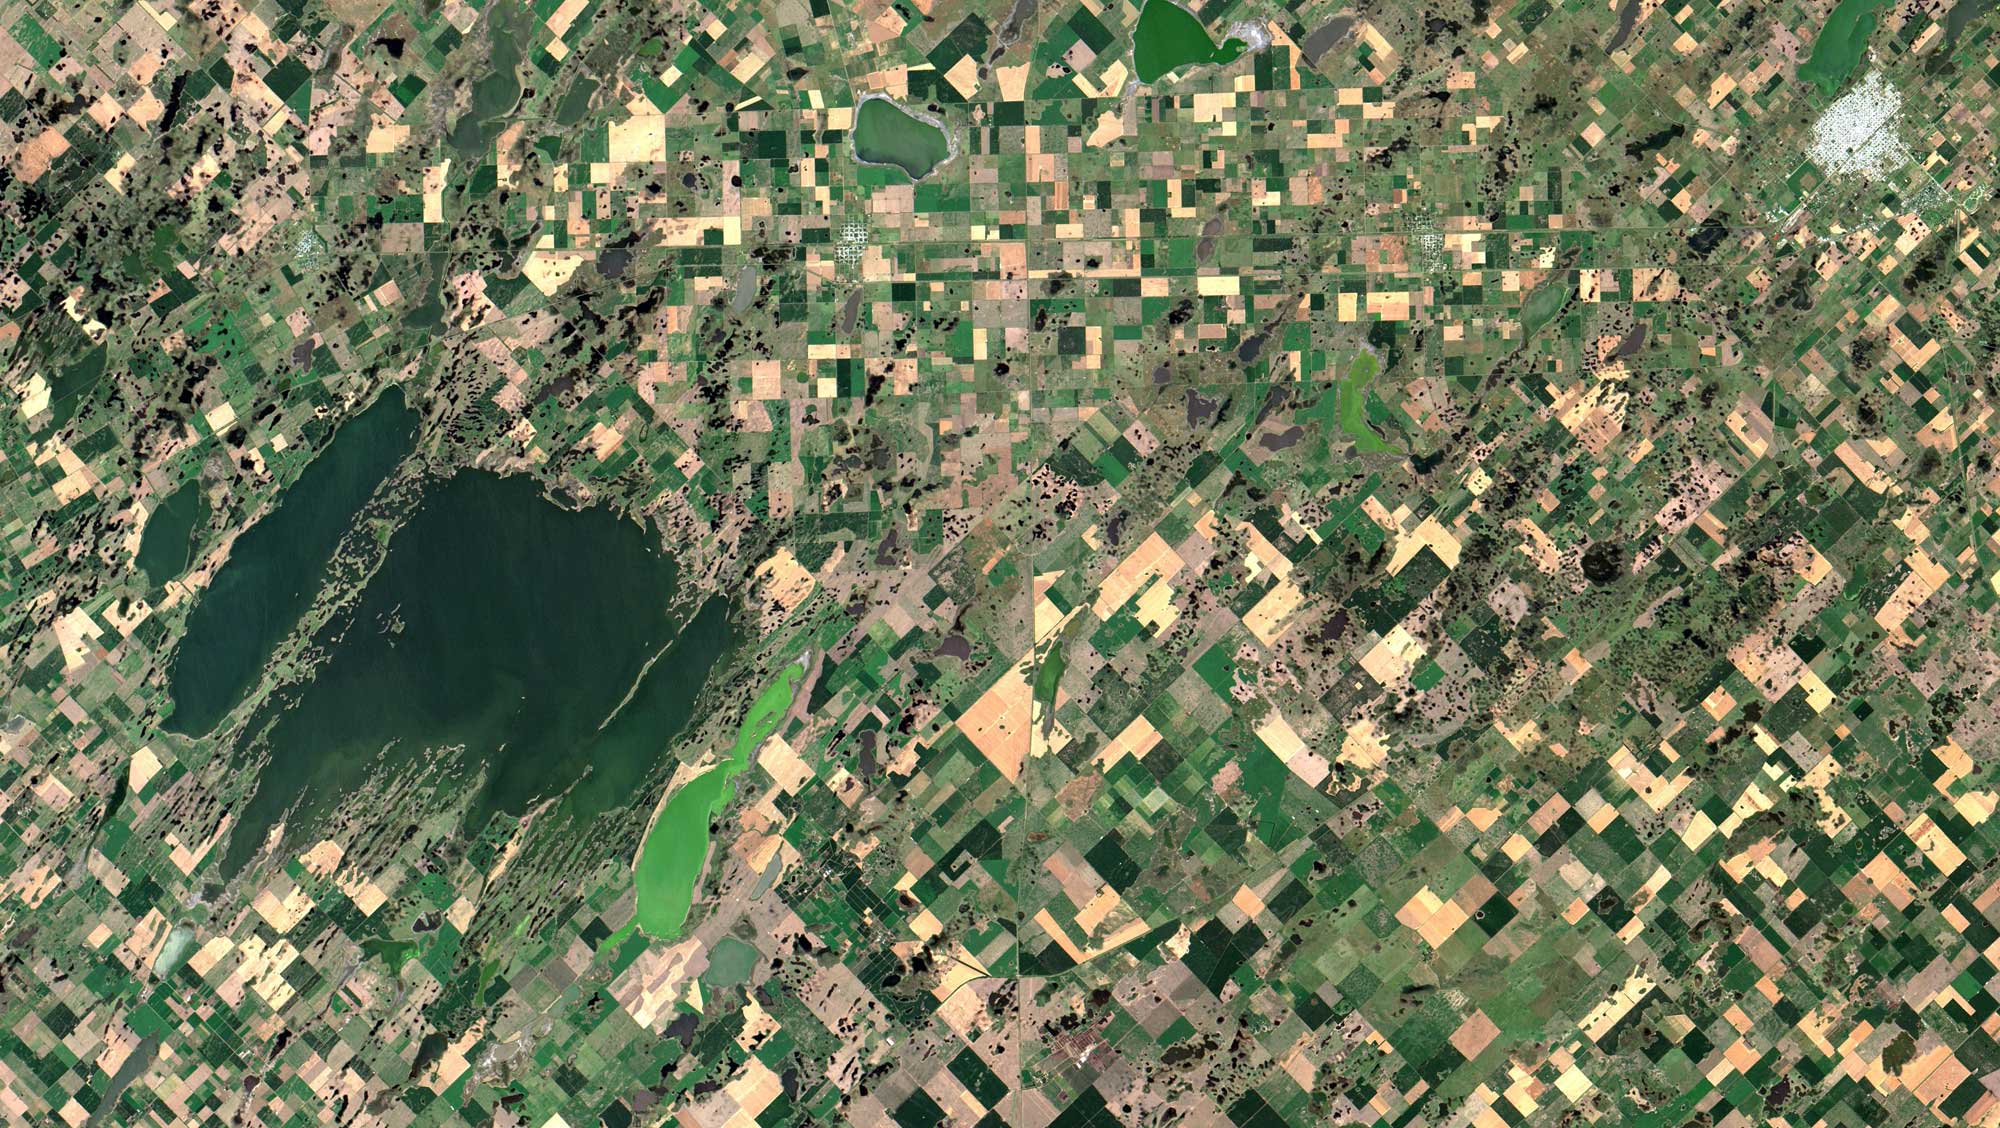 Satellite image of the humid pampas region of Cordoba, Argentina. The photo shows a landscape with many cultivated fields of various shapes as well as a large lake system on the left.